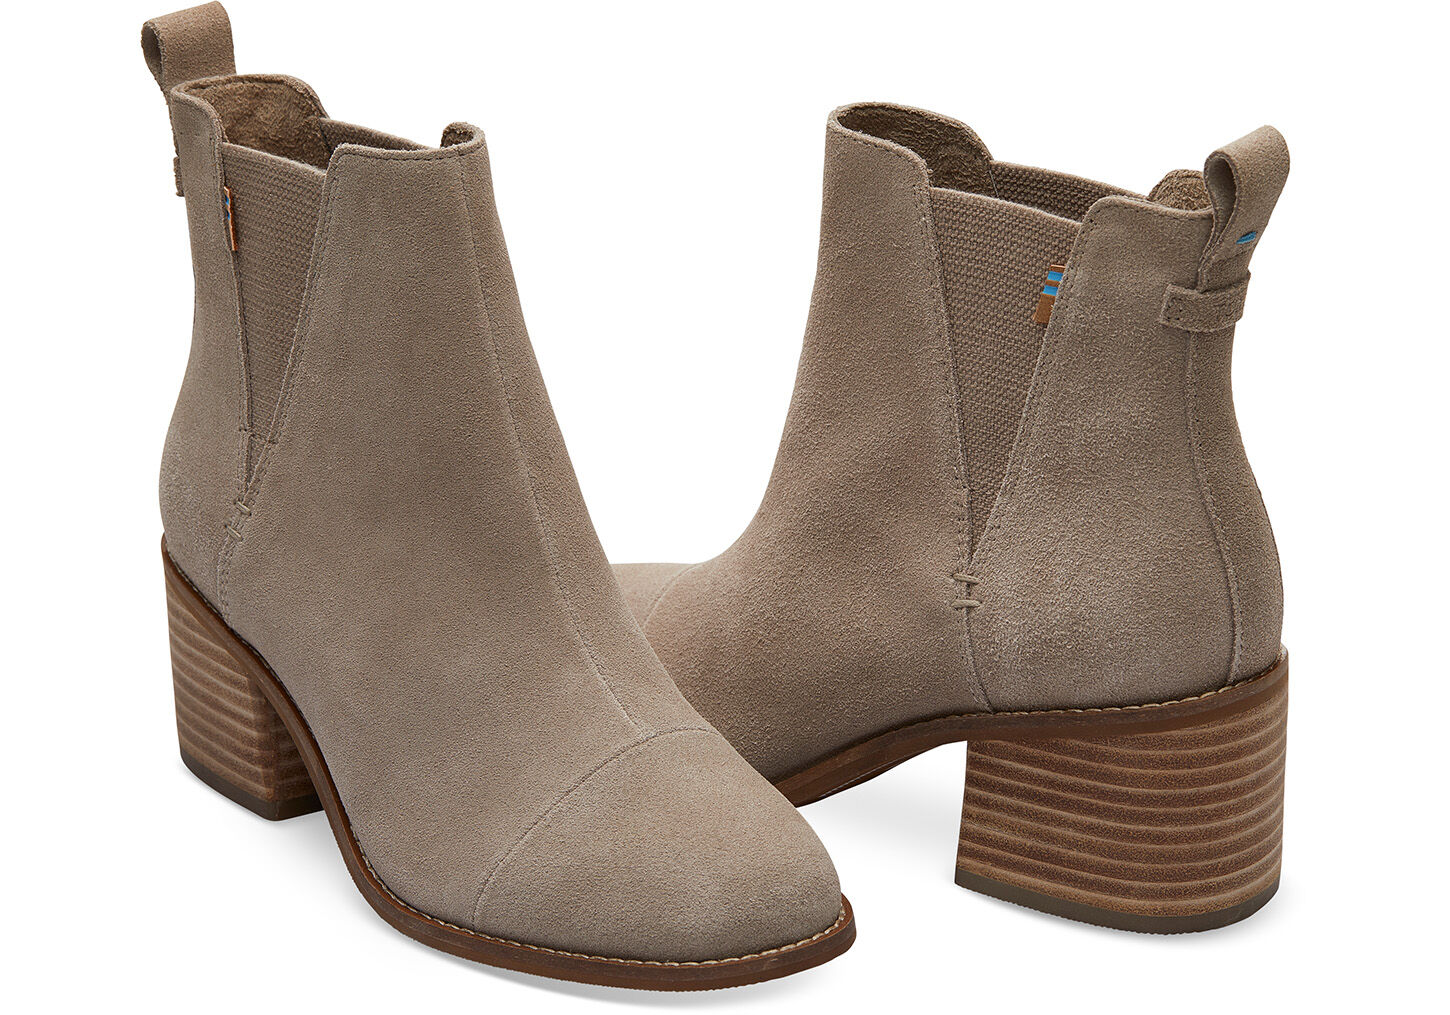 toms taupe booties